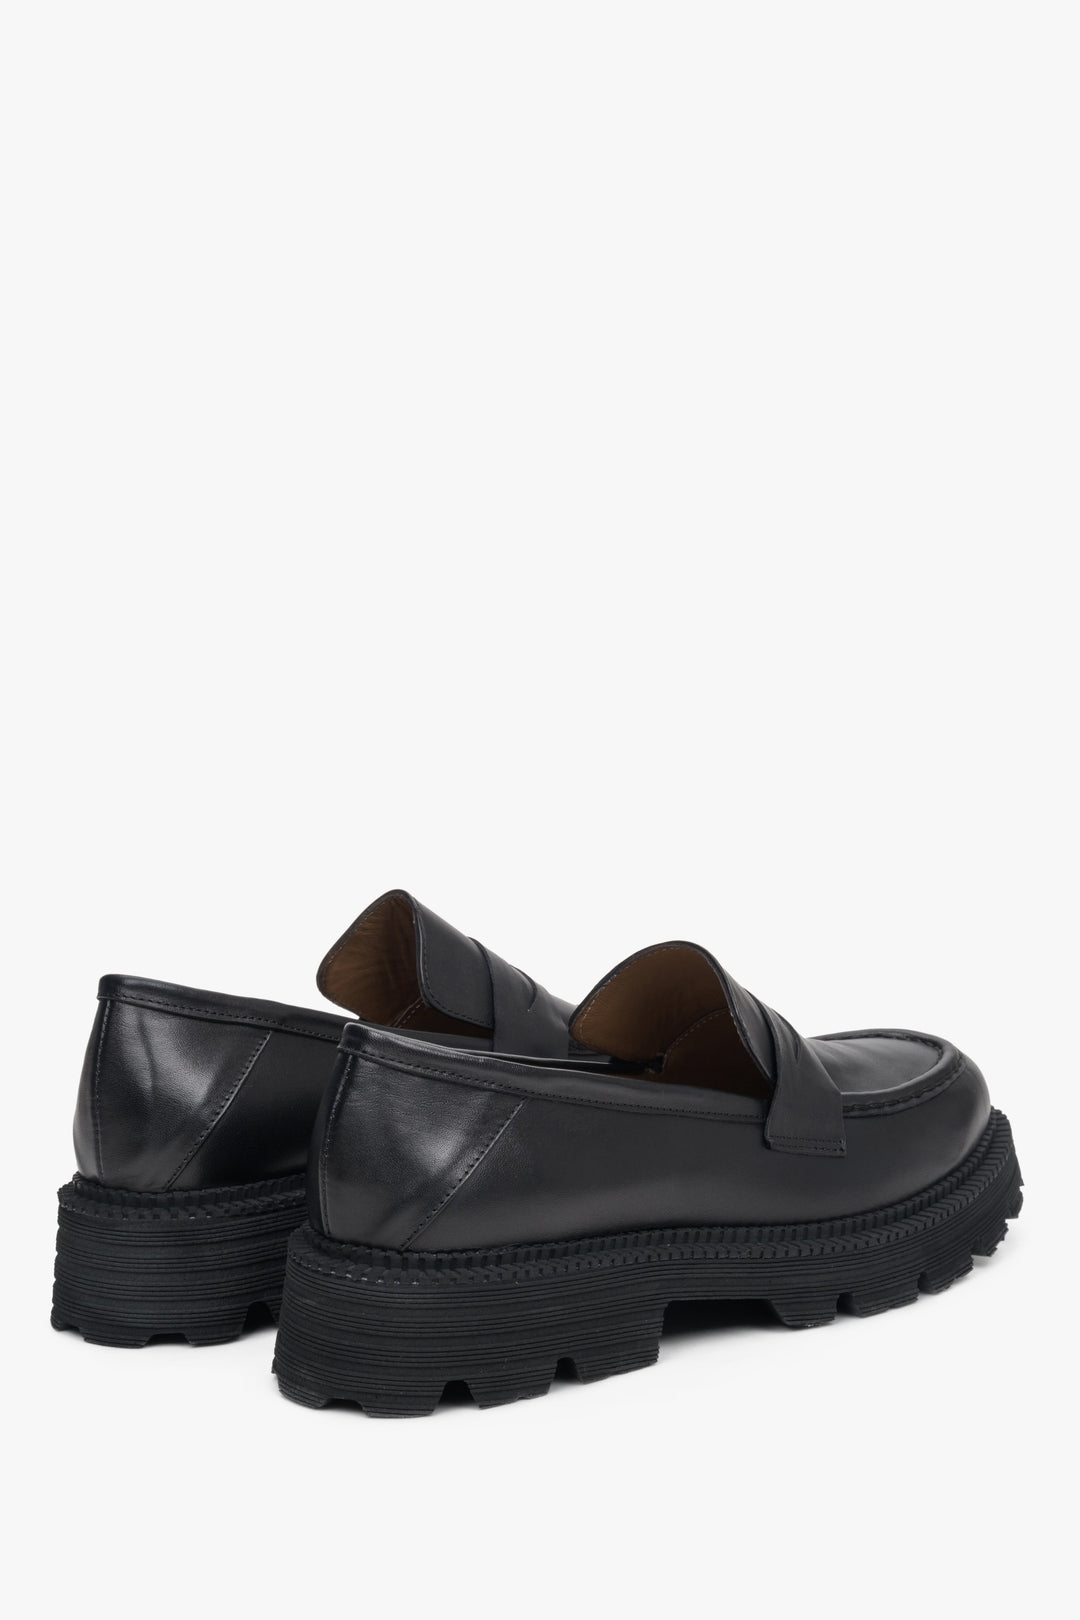 Women's black leather loafers by Estro.